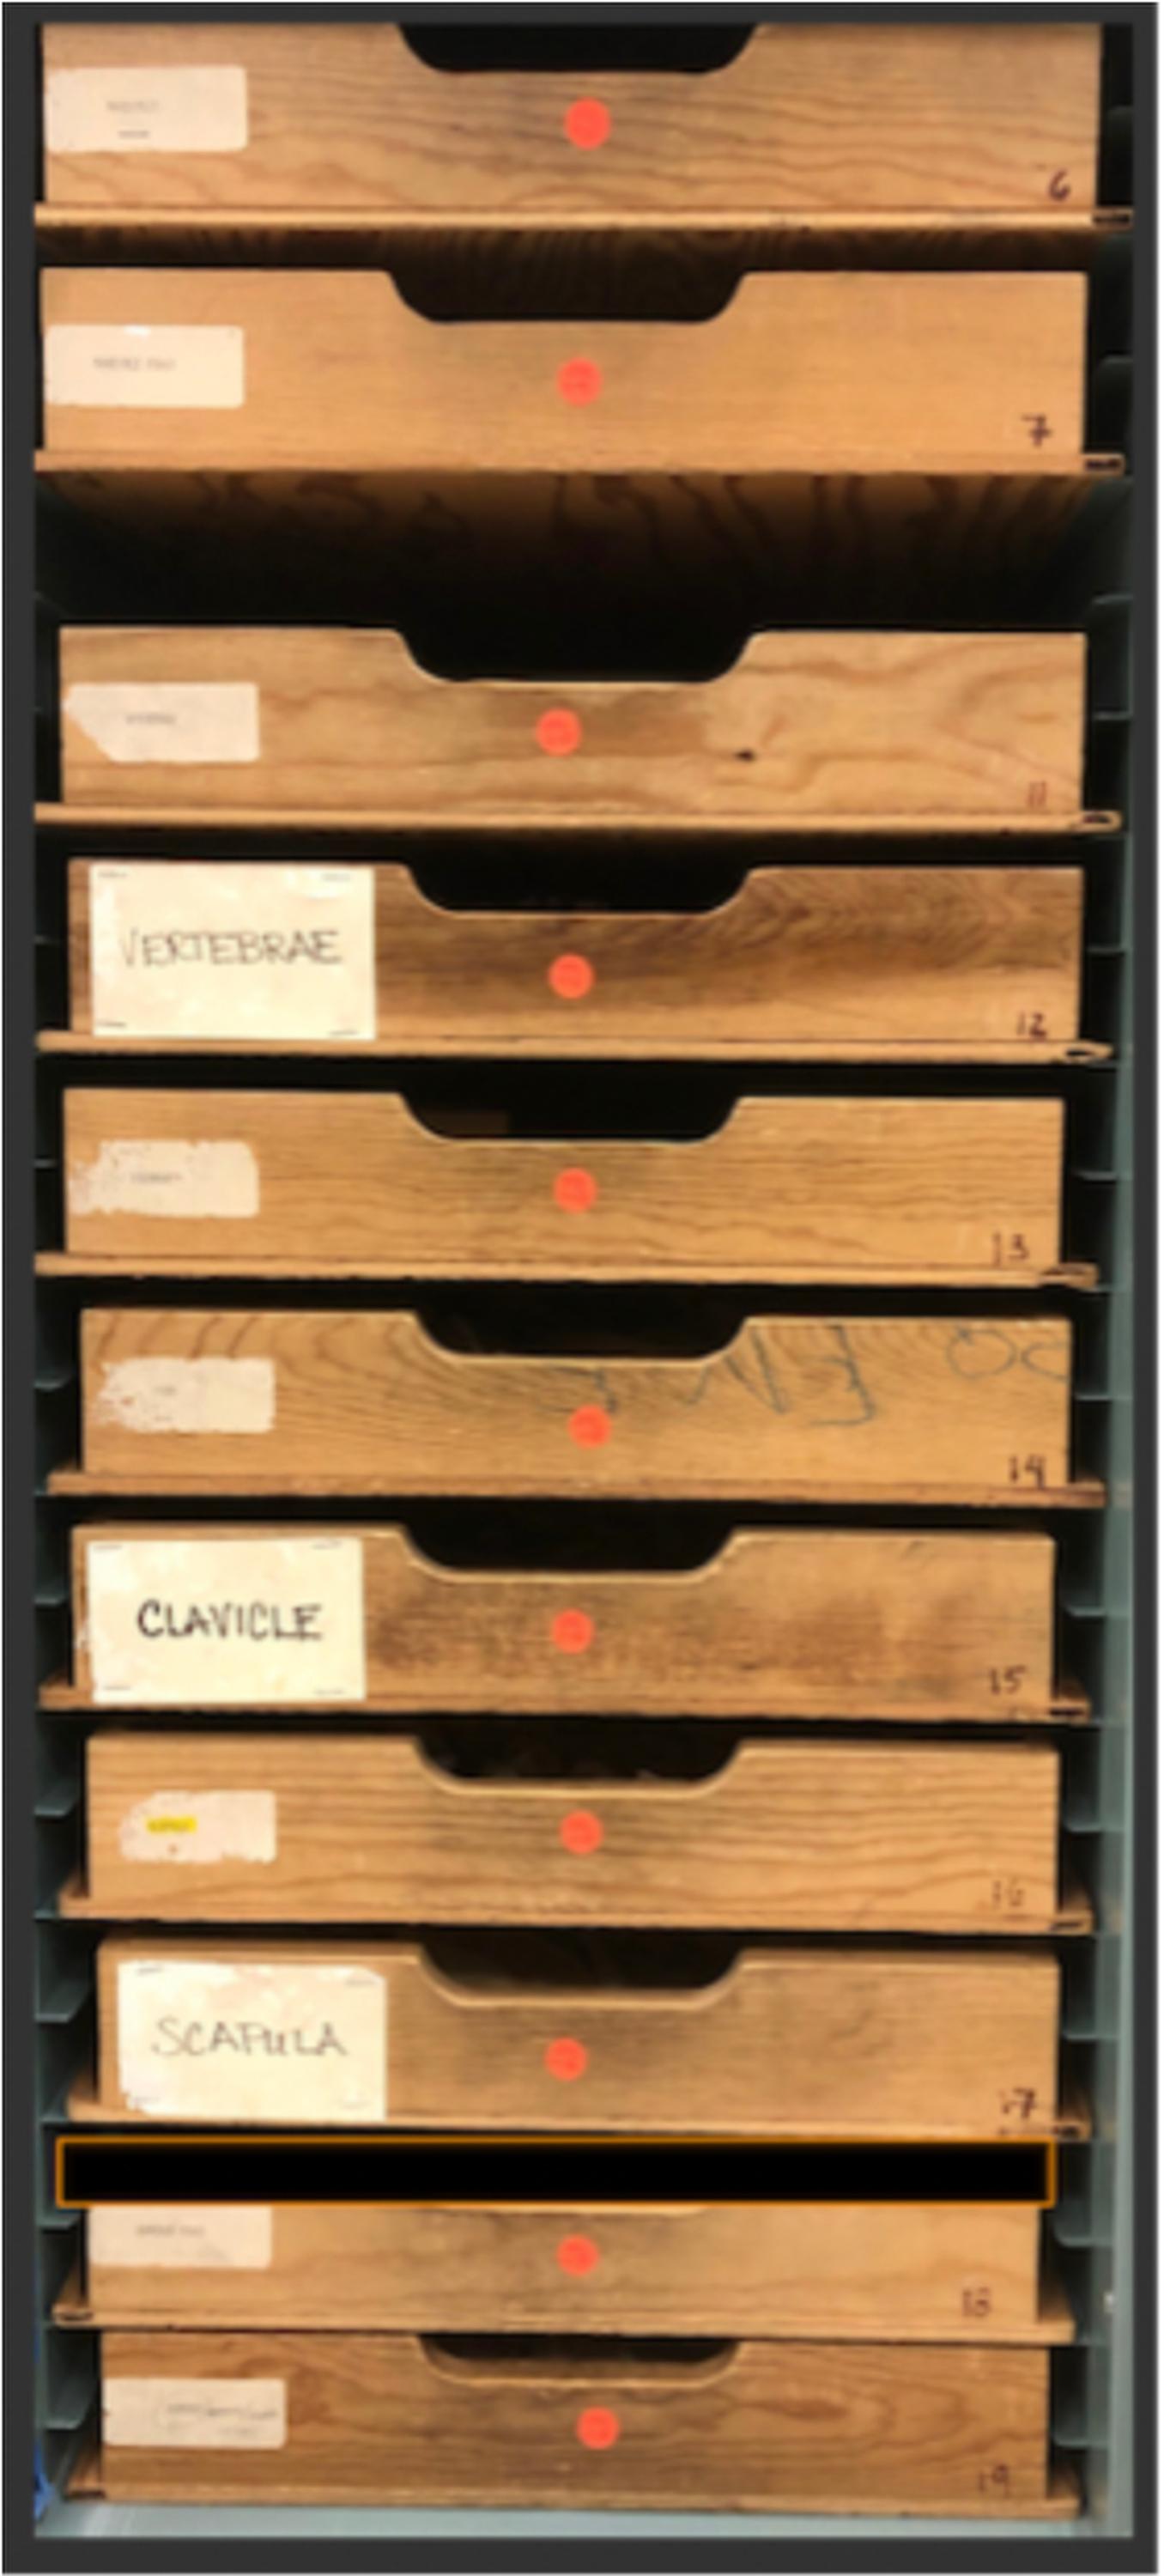 Drawers with labels including "vertebrae," "clavicle," and "scapula"